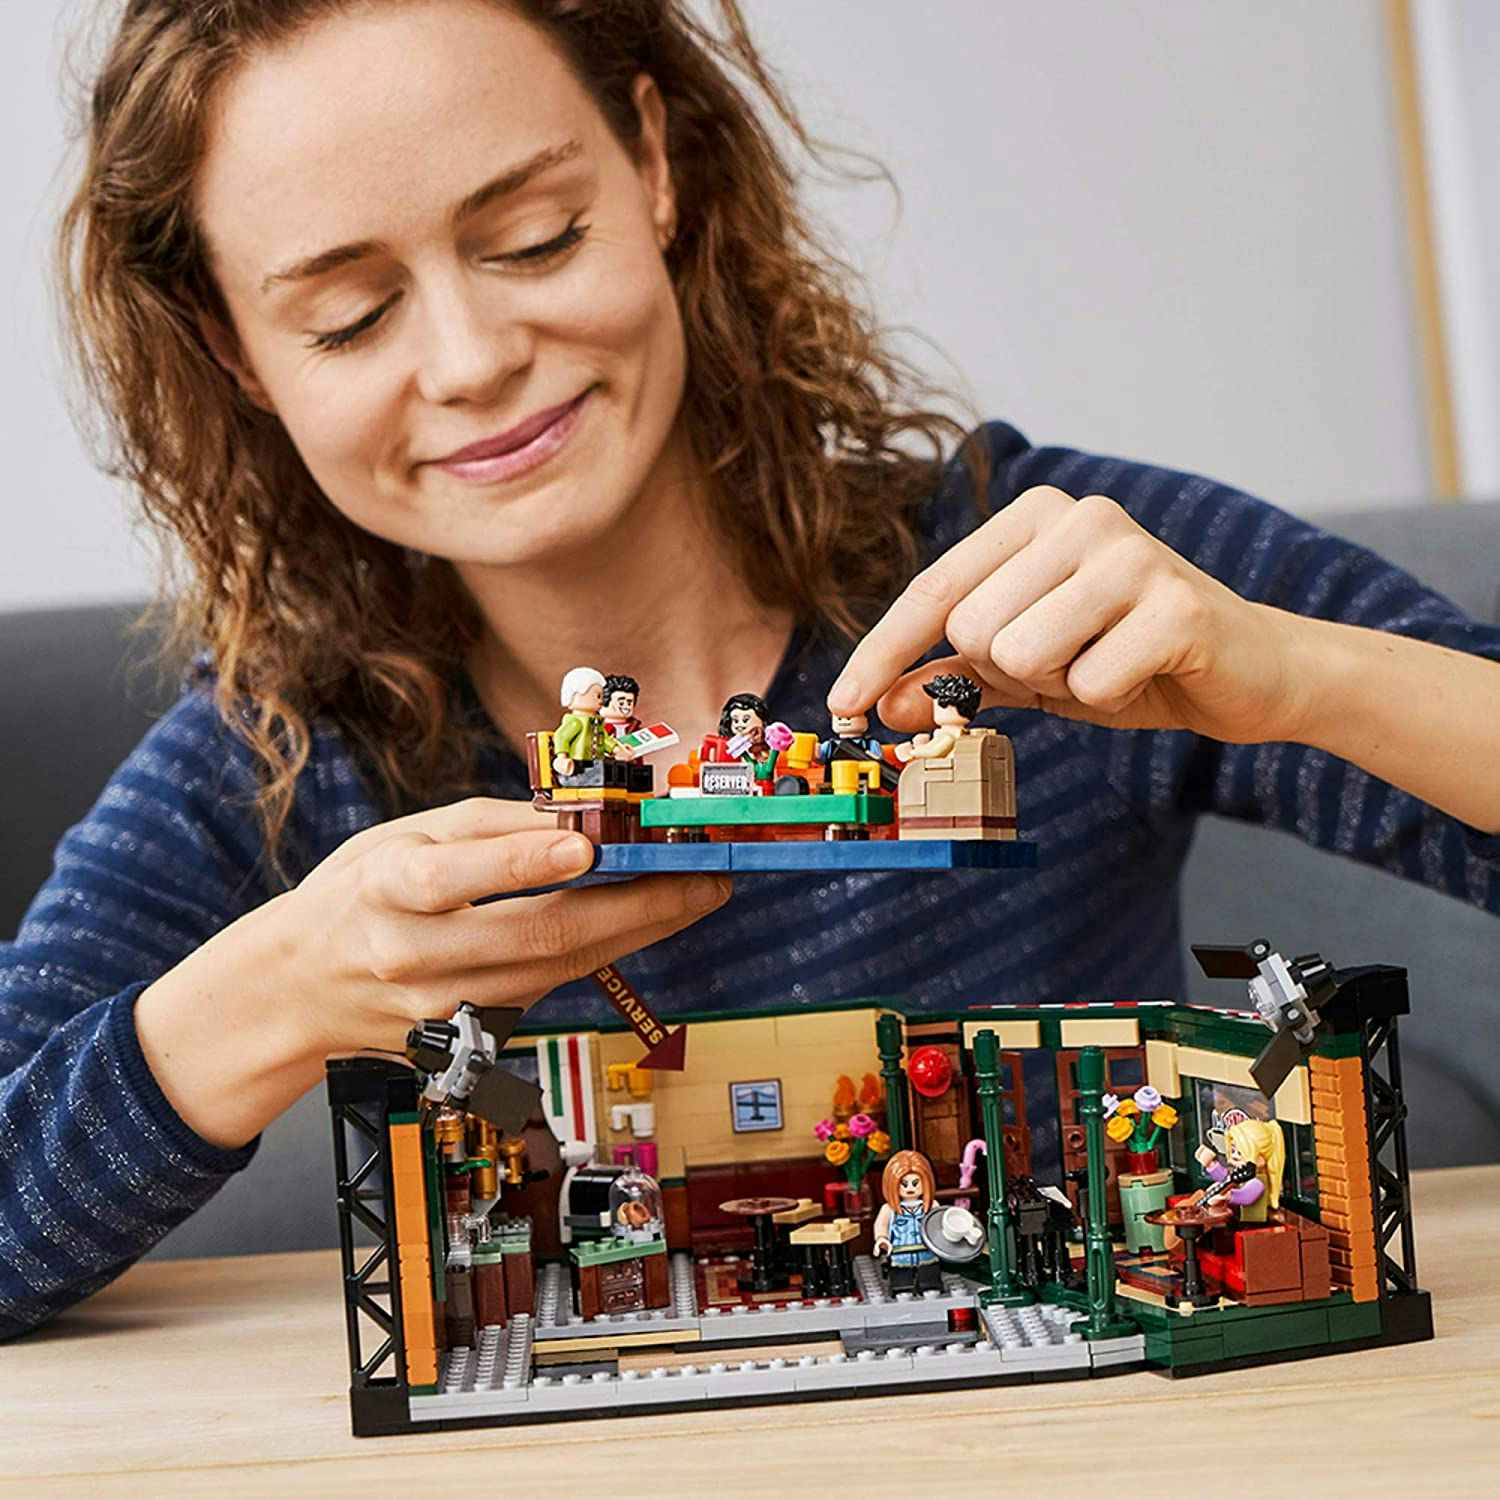 A woman playing with a LEGO Friends building kit.